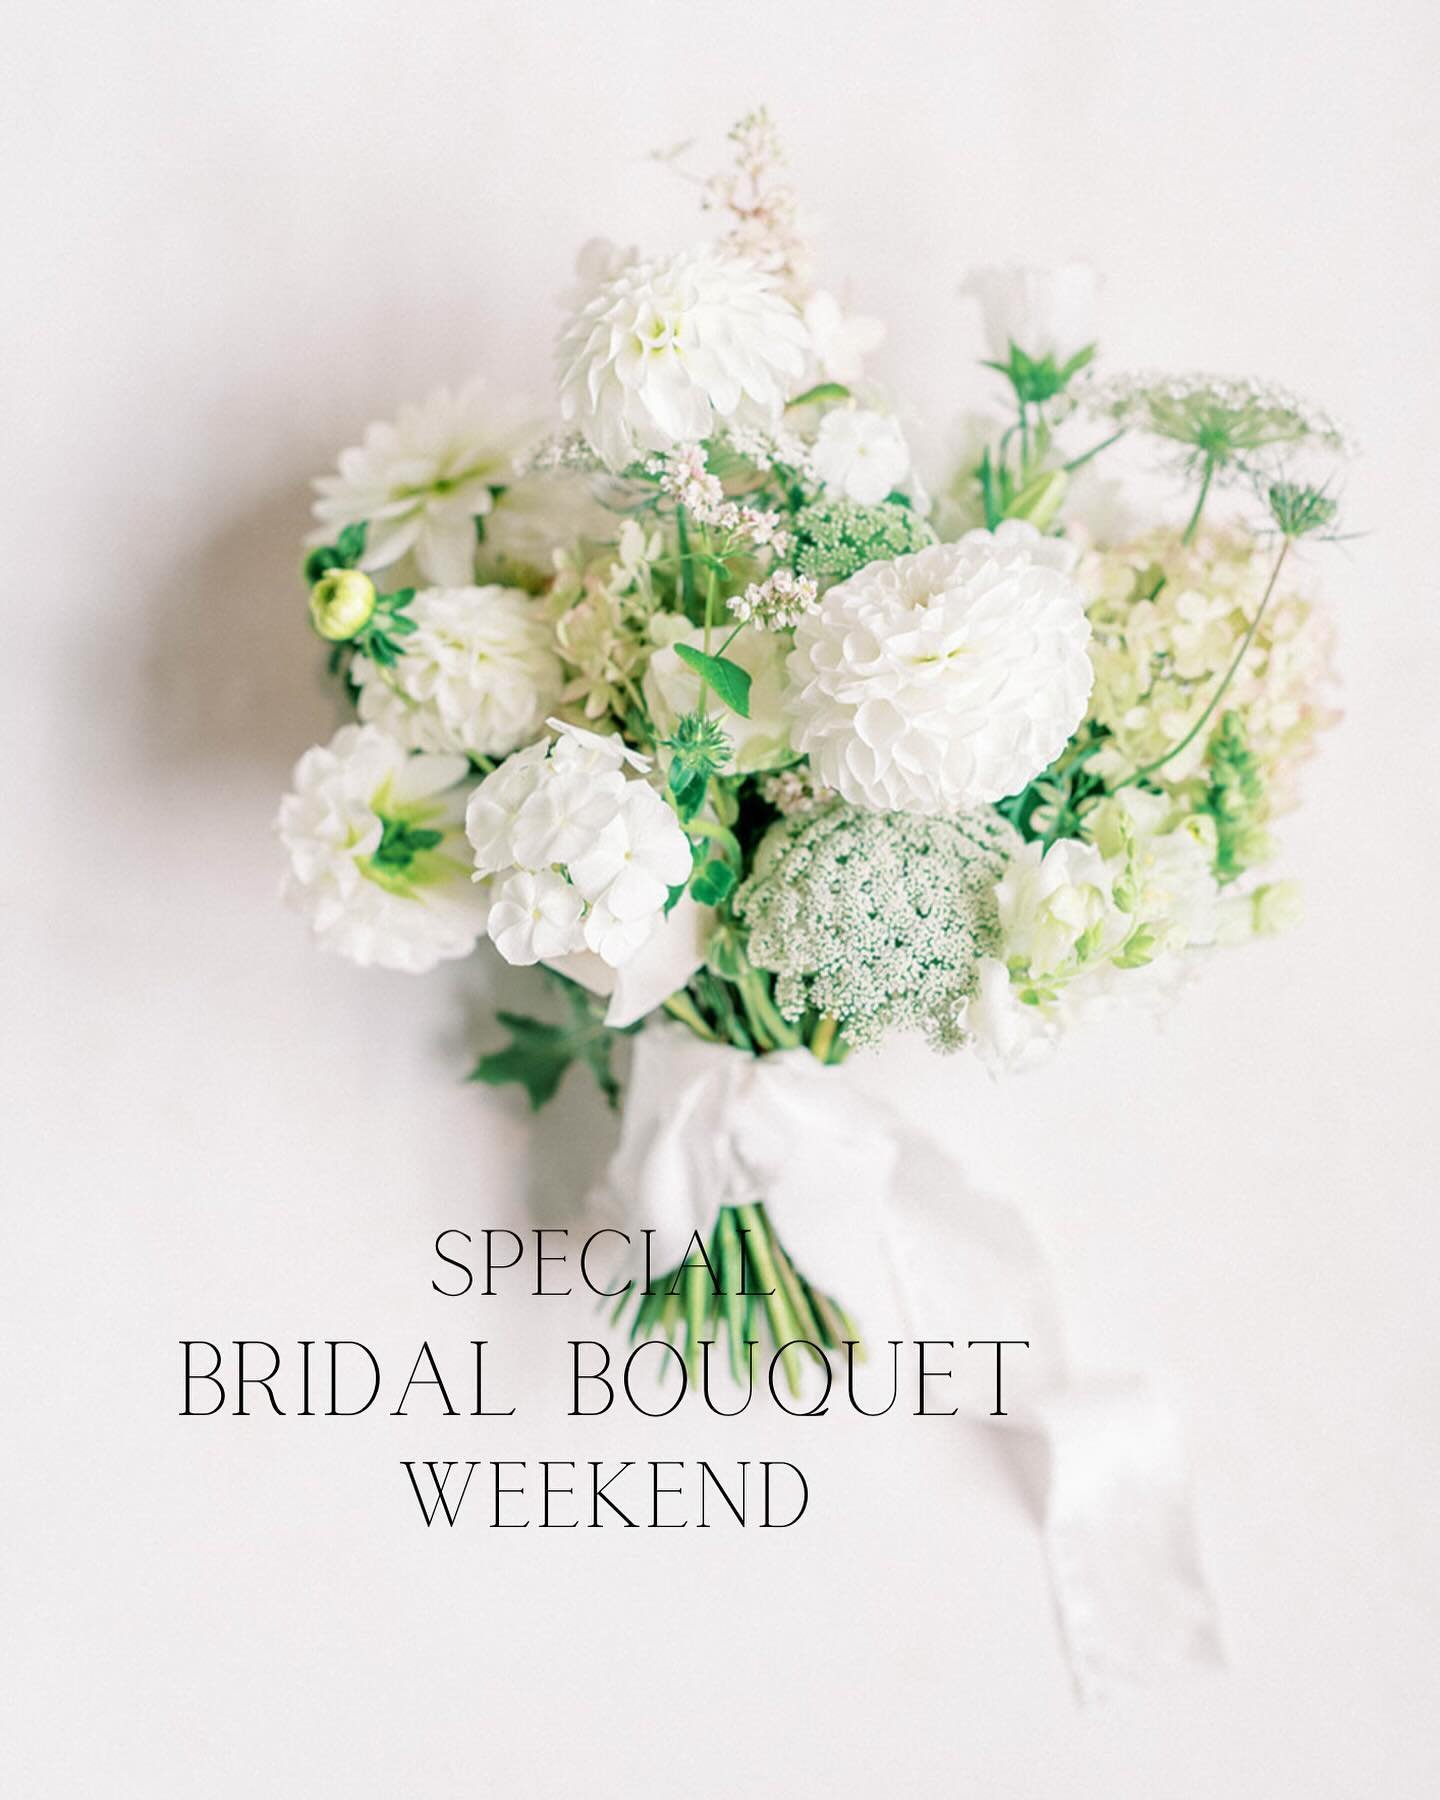 Getting married around May 8th-12th? This is for you!! 🫶🏼
As we only take on one wedding per weekend these days and I&rsquo;ve had to turn down many smaller requests for a bridal bouquet, I&rsquo;ve thought a lot of how I can best serve you and may